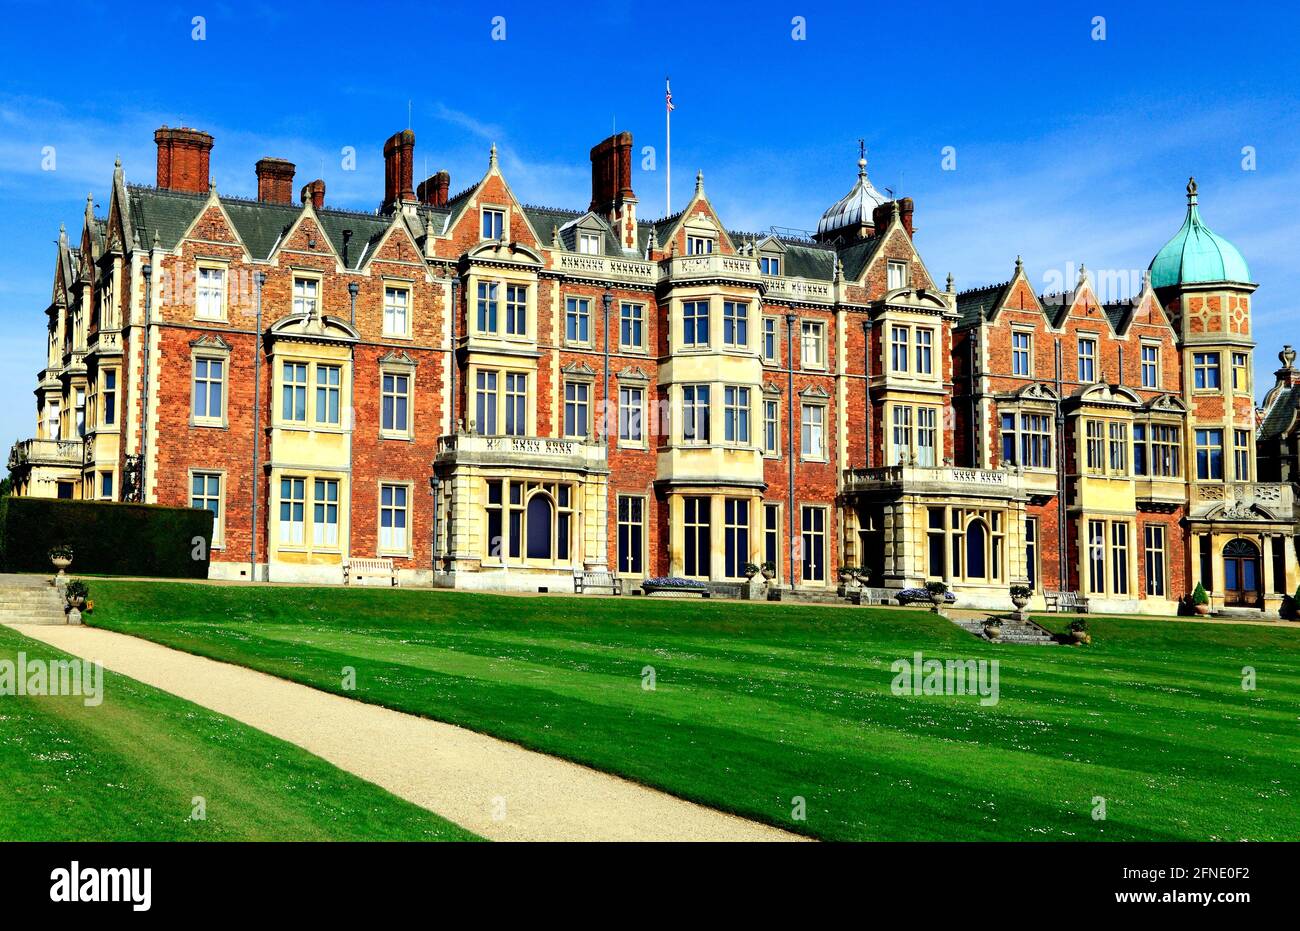 Sandringham House, Norfolk, country retreat, of HM the Queen, 19th century, British Victorian architecture, England UK Stock Photo